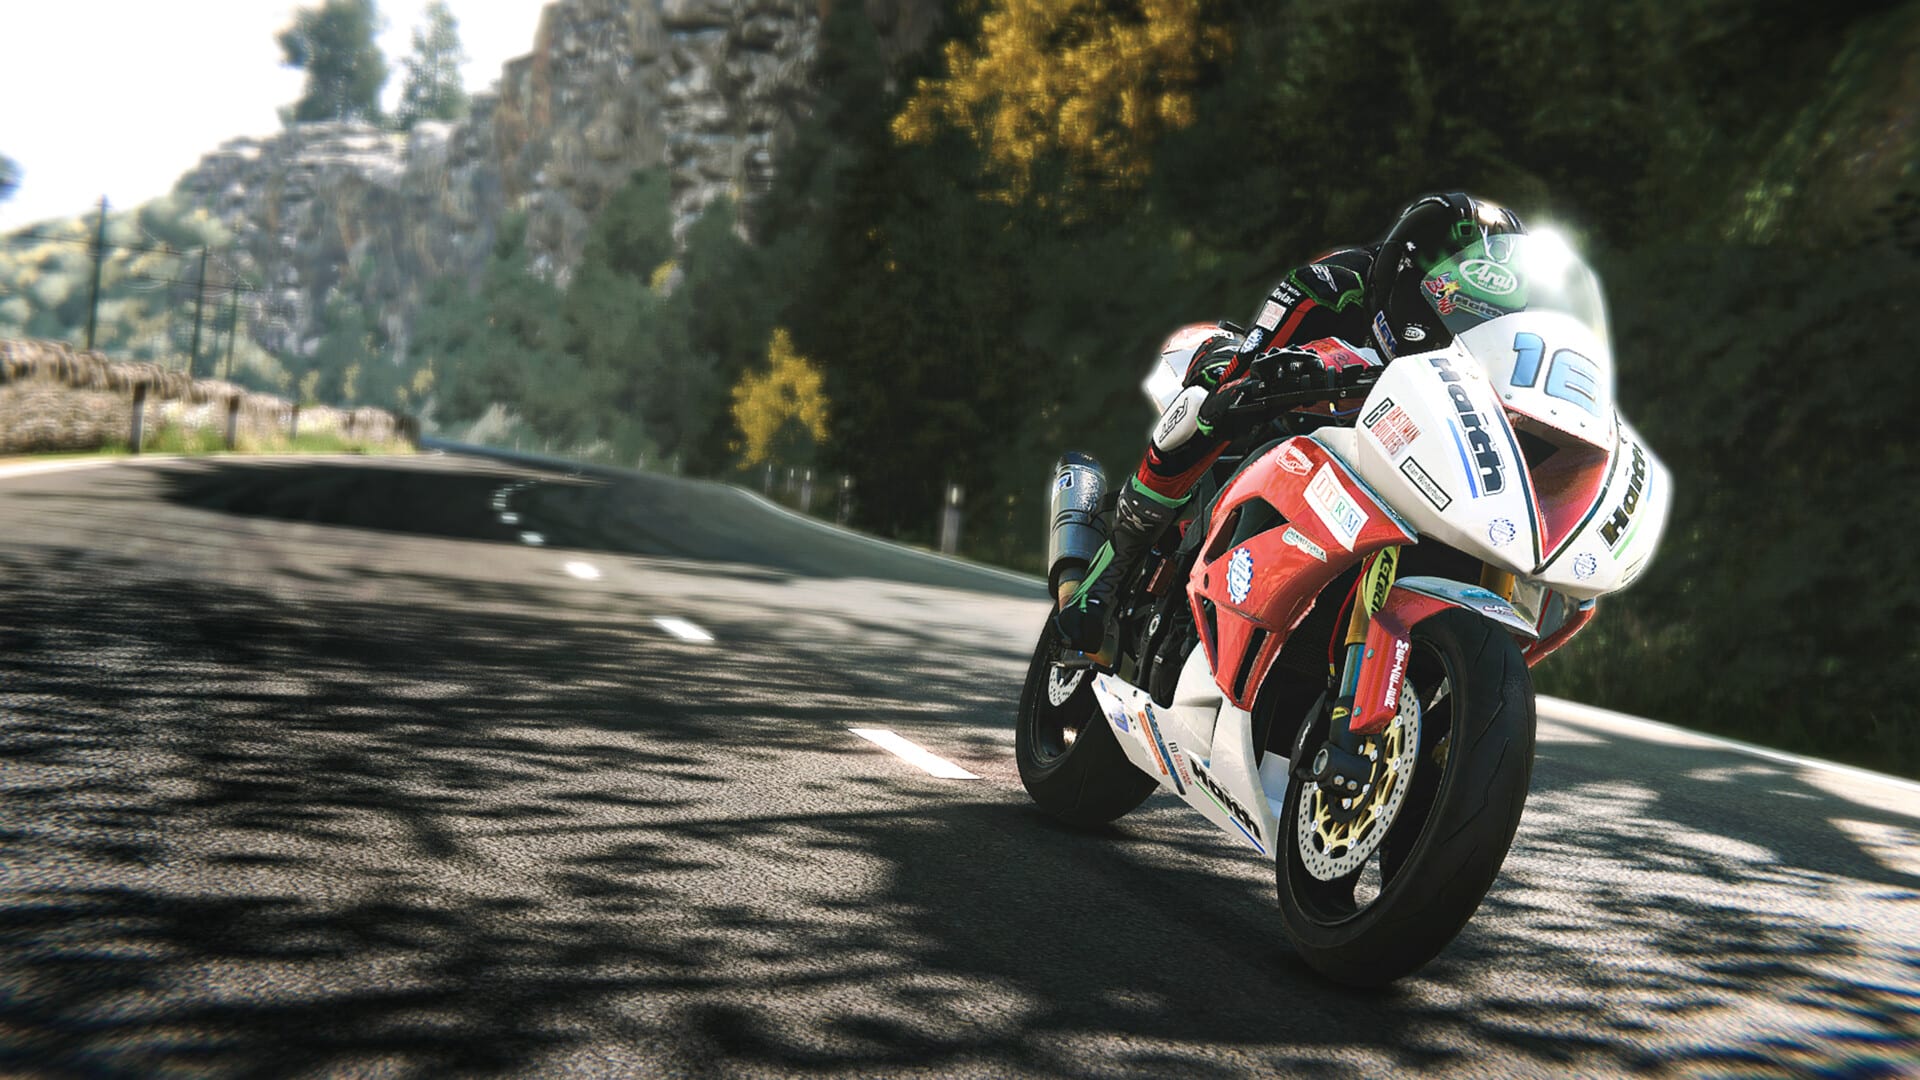 TT Isle of Man: Ride on the Edge 3 Update 1.06 Races Out This July 3